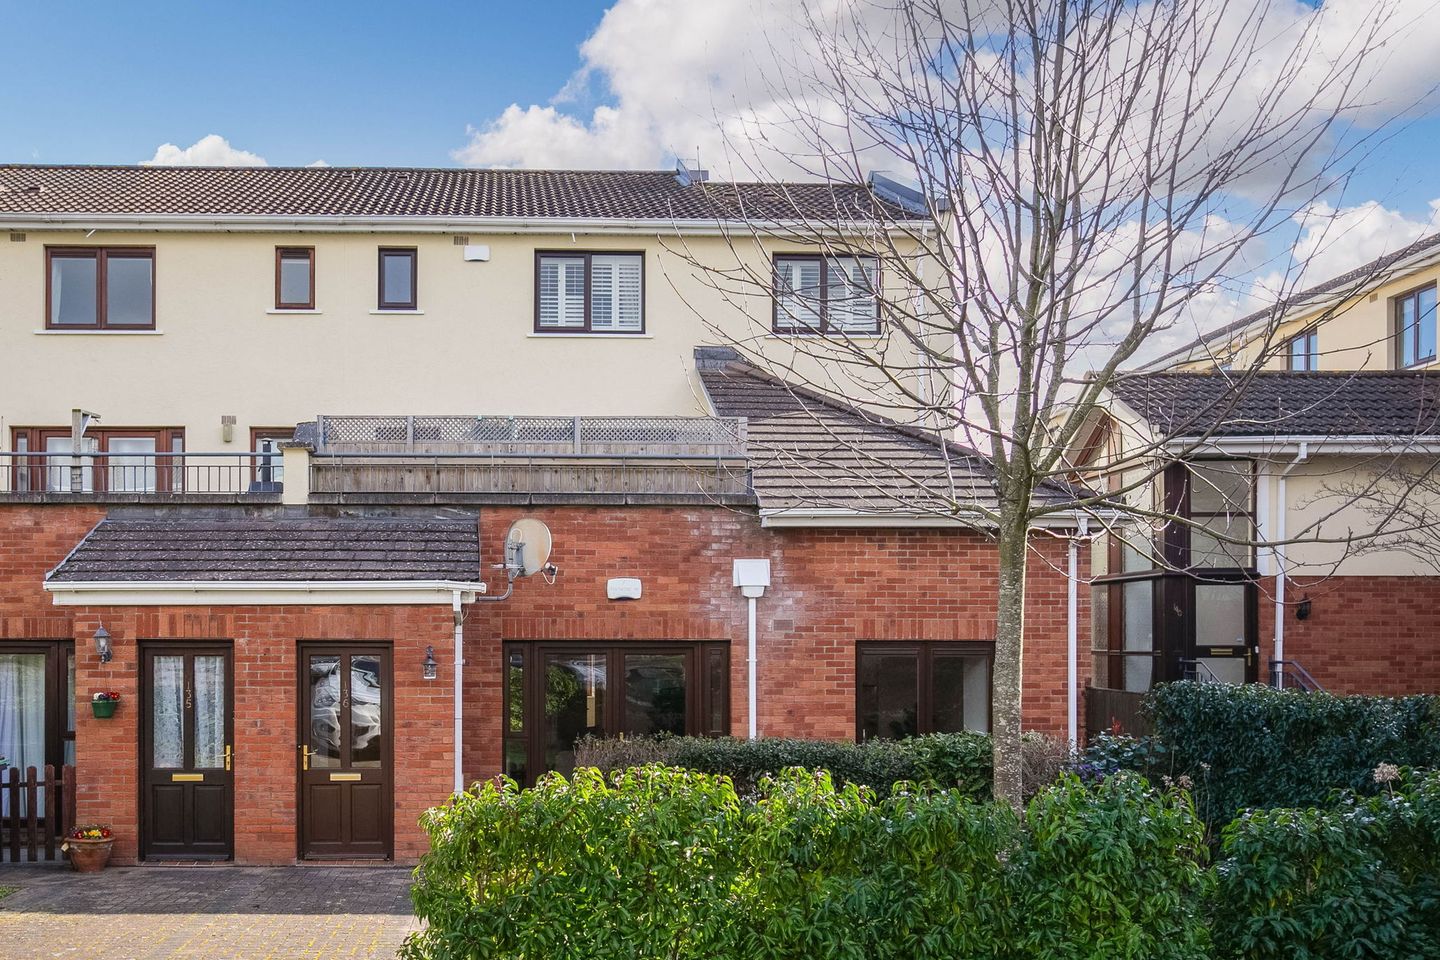 136 Charlesland Park, Greystones, Co. Wicklow, A63FP62